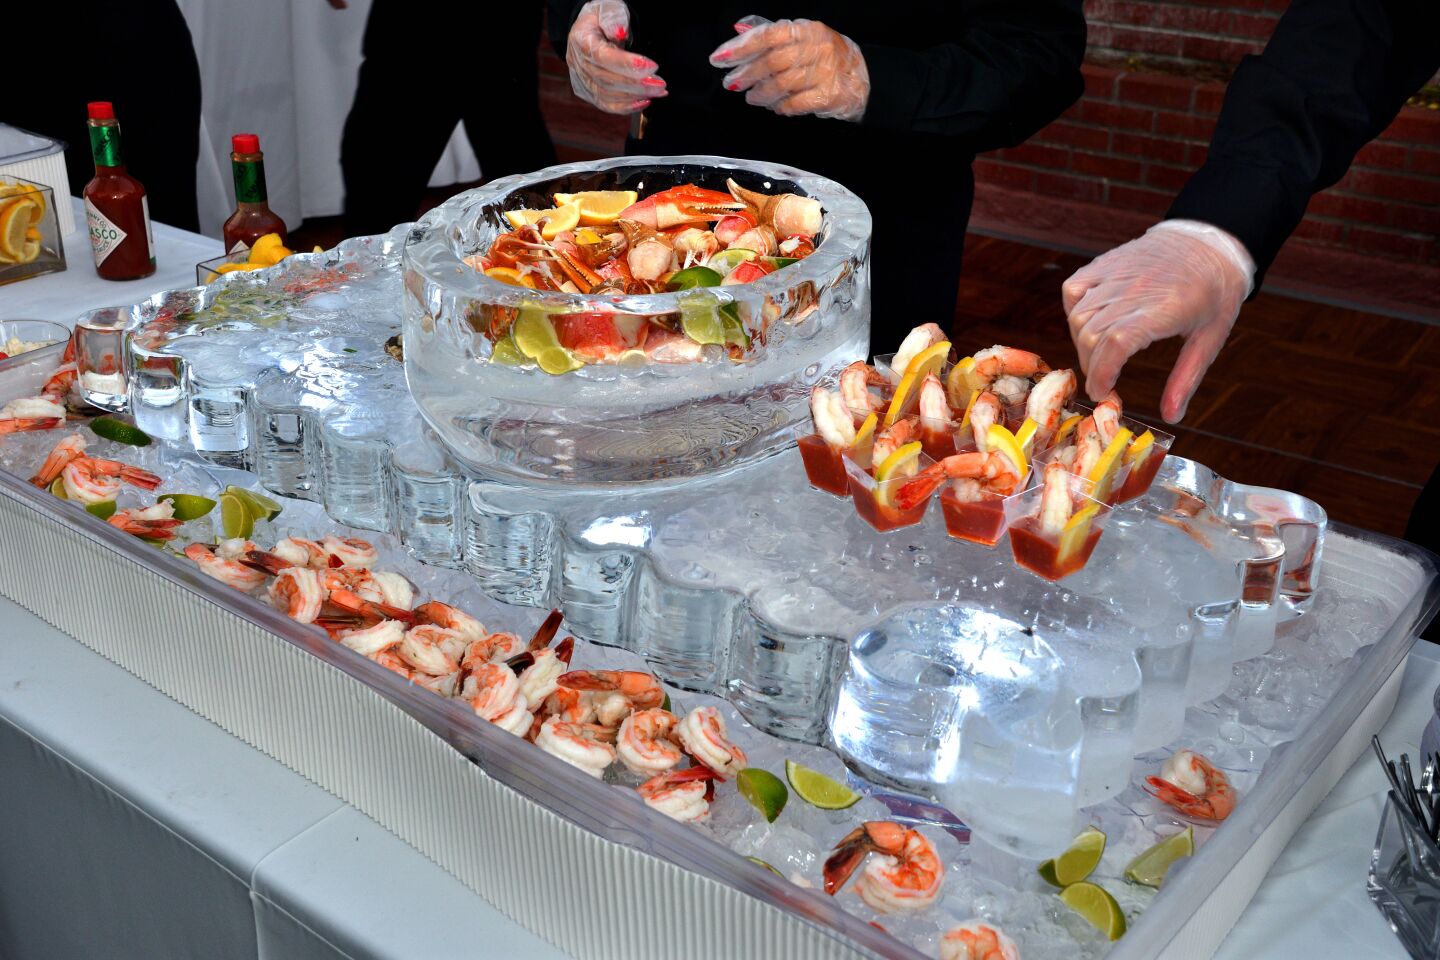 Guests dig into the seafood bar at the 75th Jewel Ball.